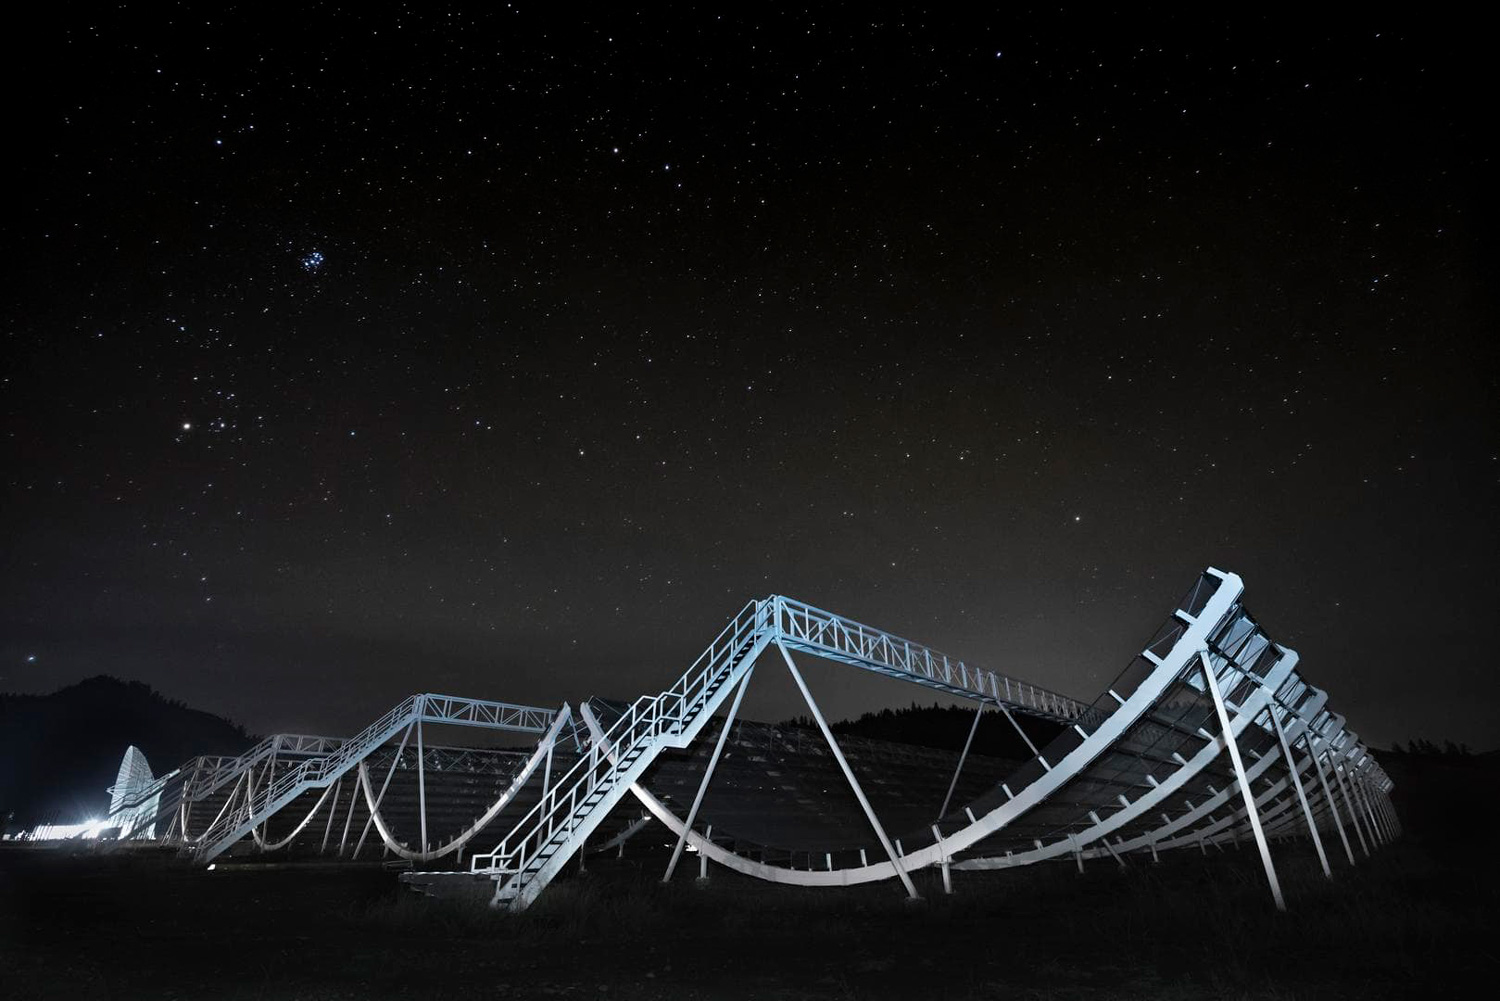 CHIME telescope detects more than 500 mysterious fast radio bursts in its first year of operation